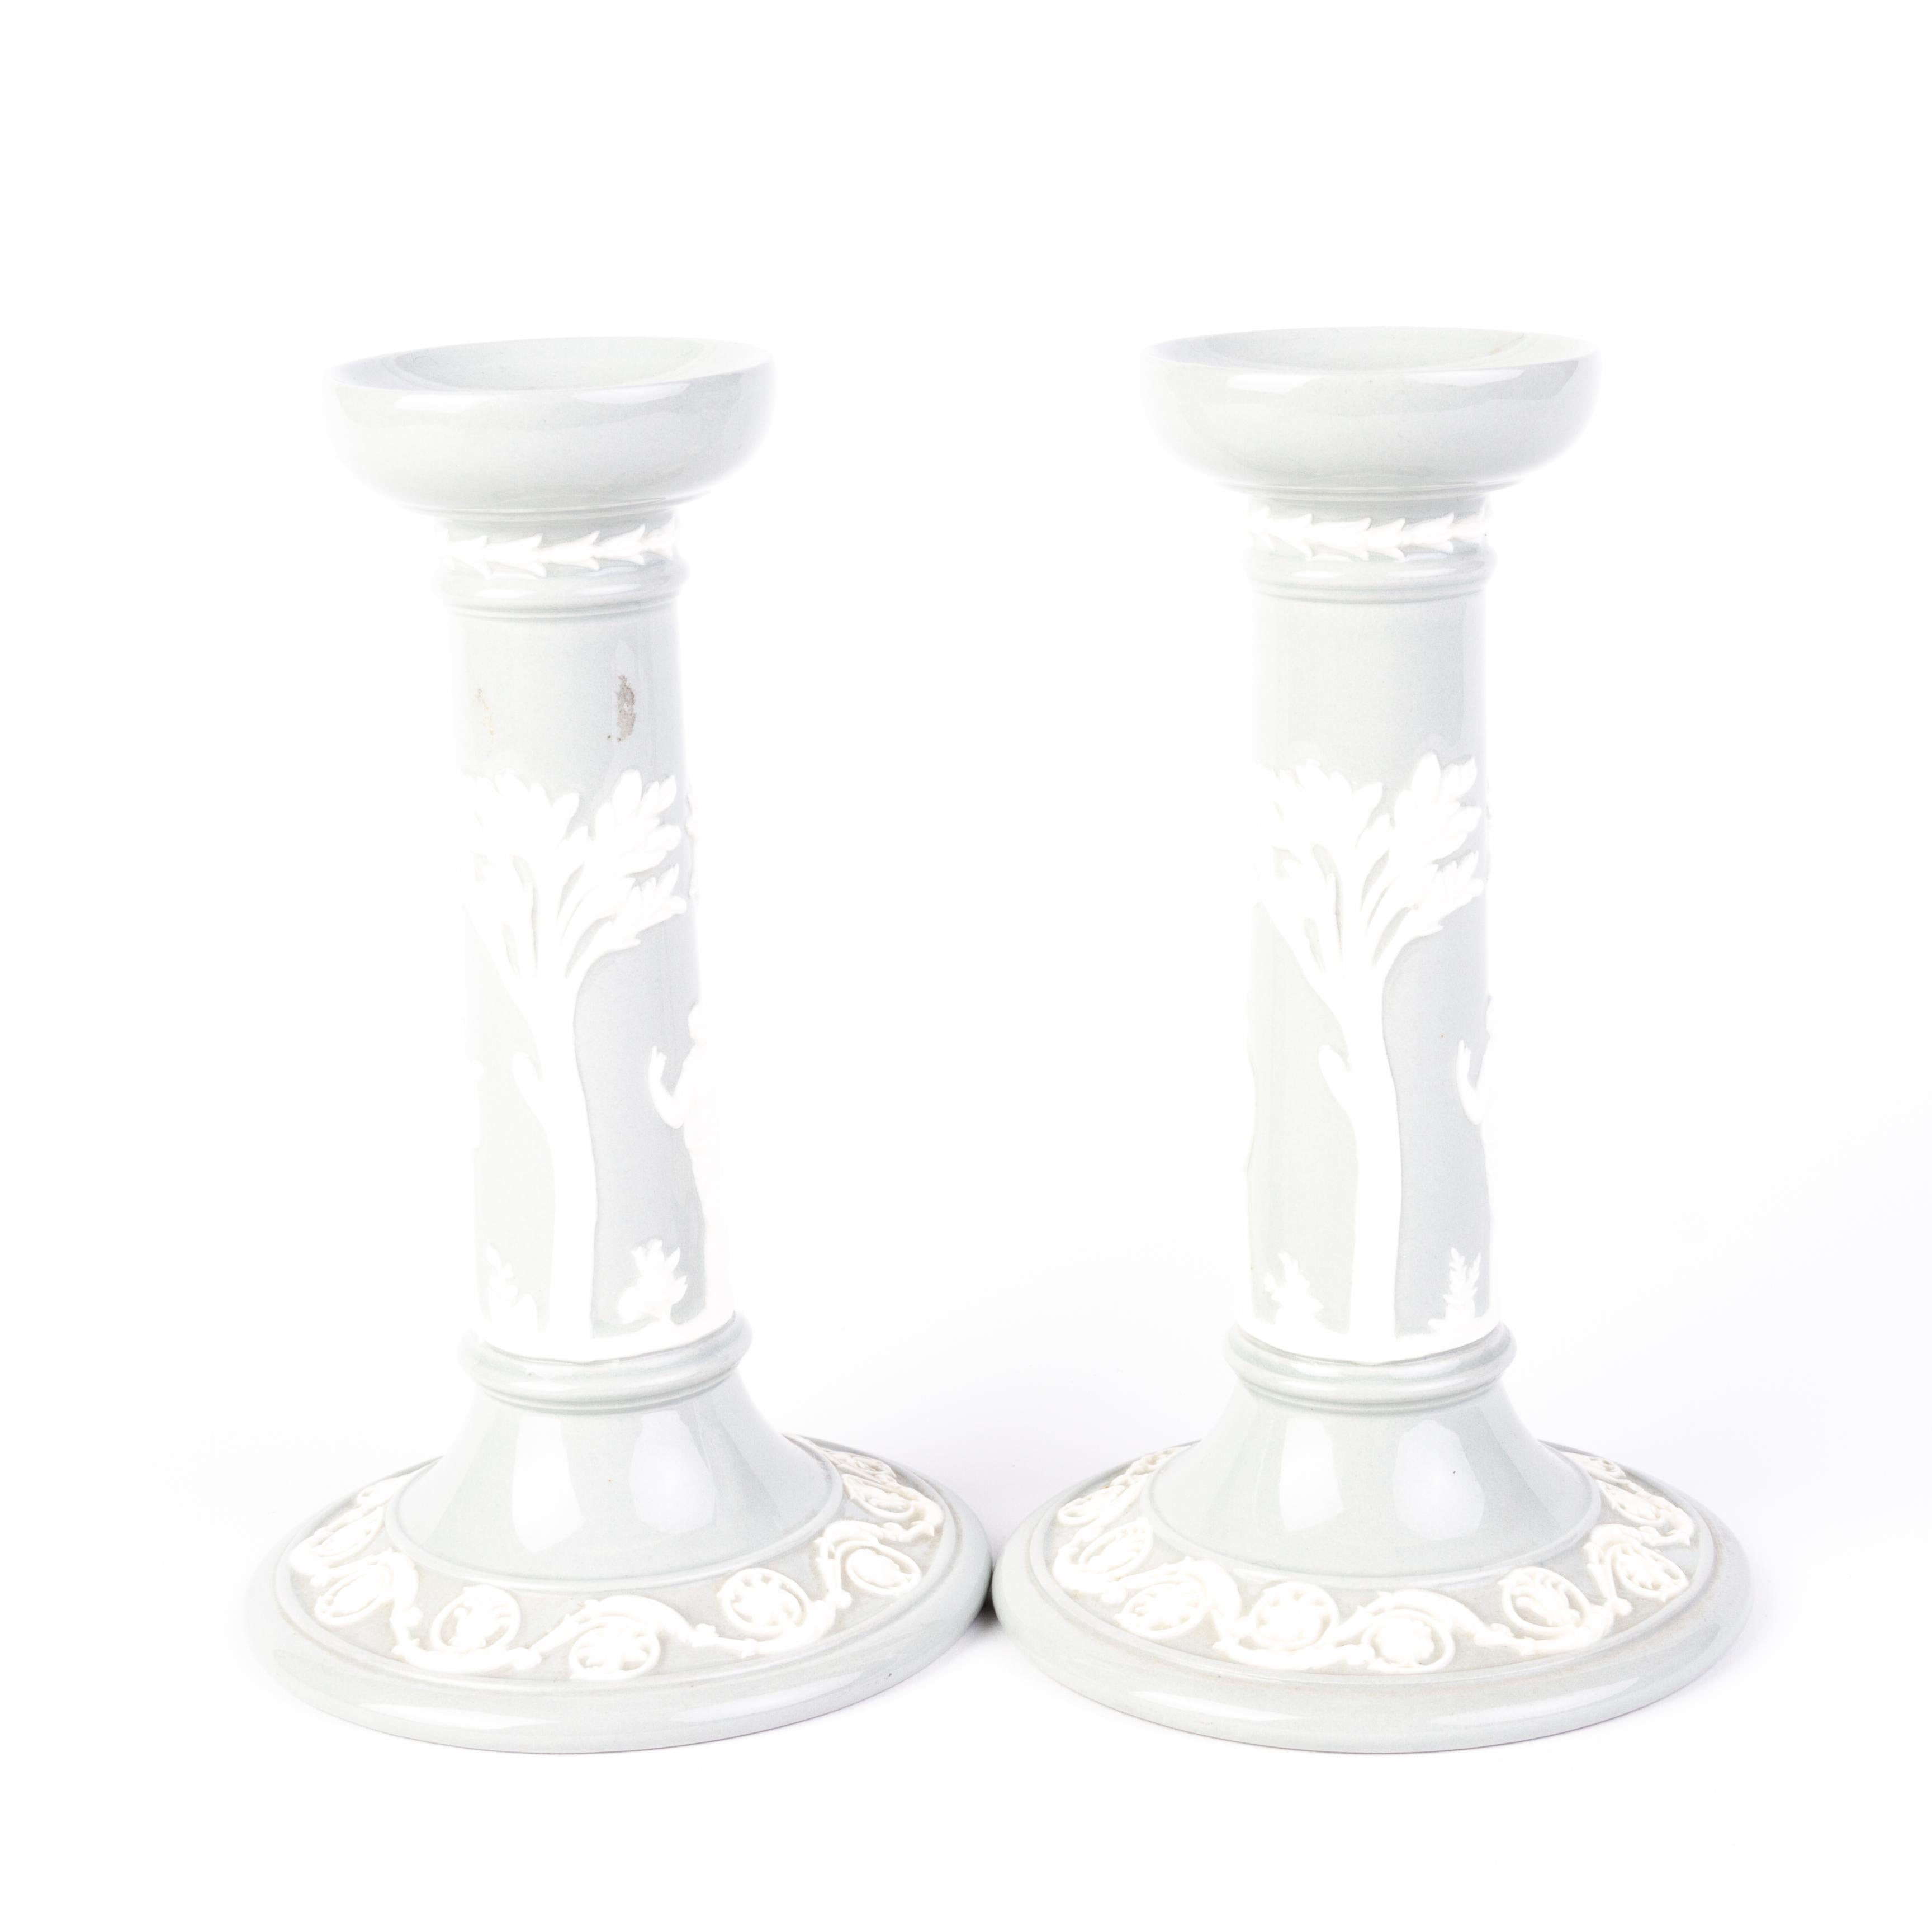 Pair of Wedgwood Queens Ware Neoclassical Cameo Candlesticks 
Good condition 
From a private collection.
Free international shipping.